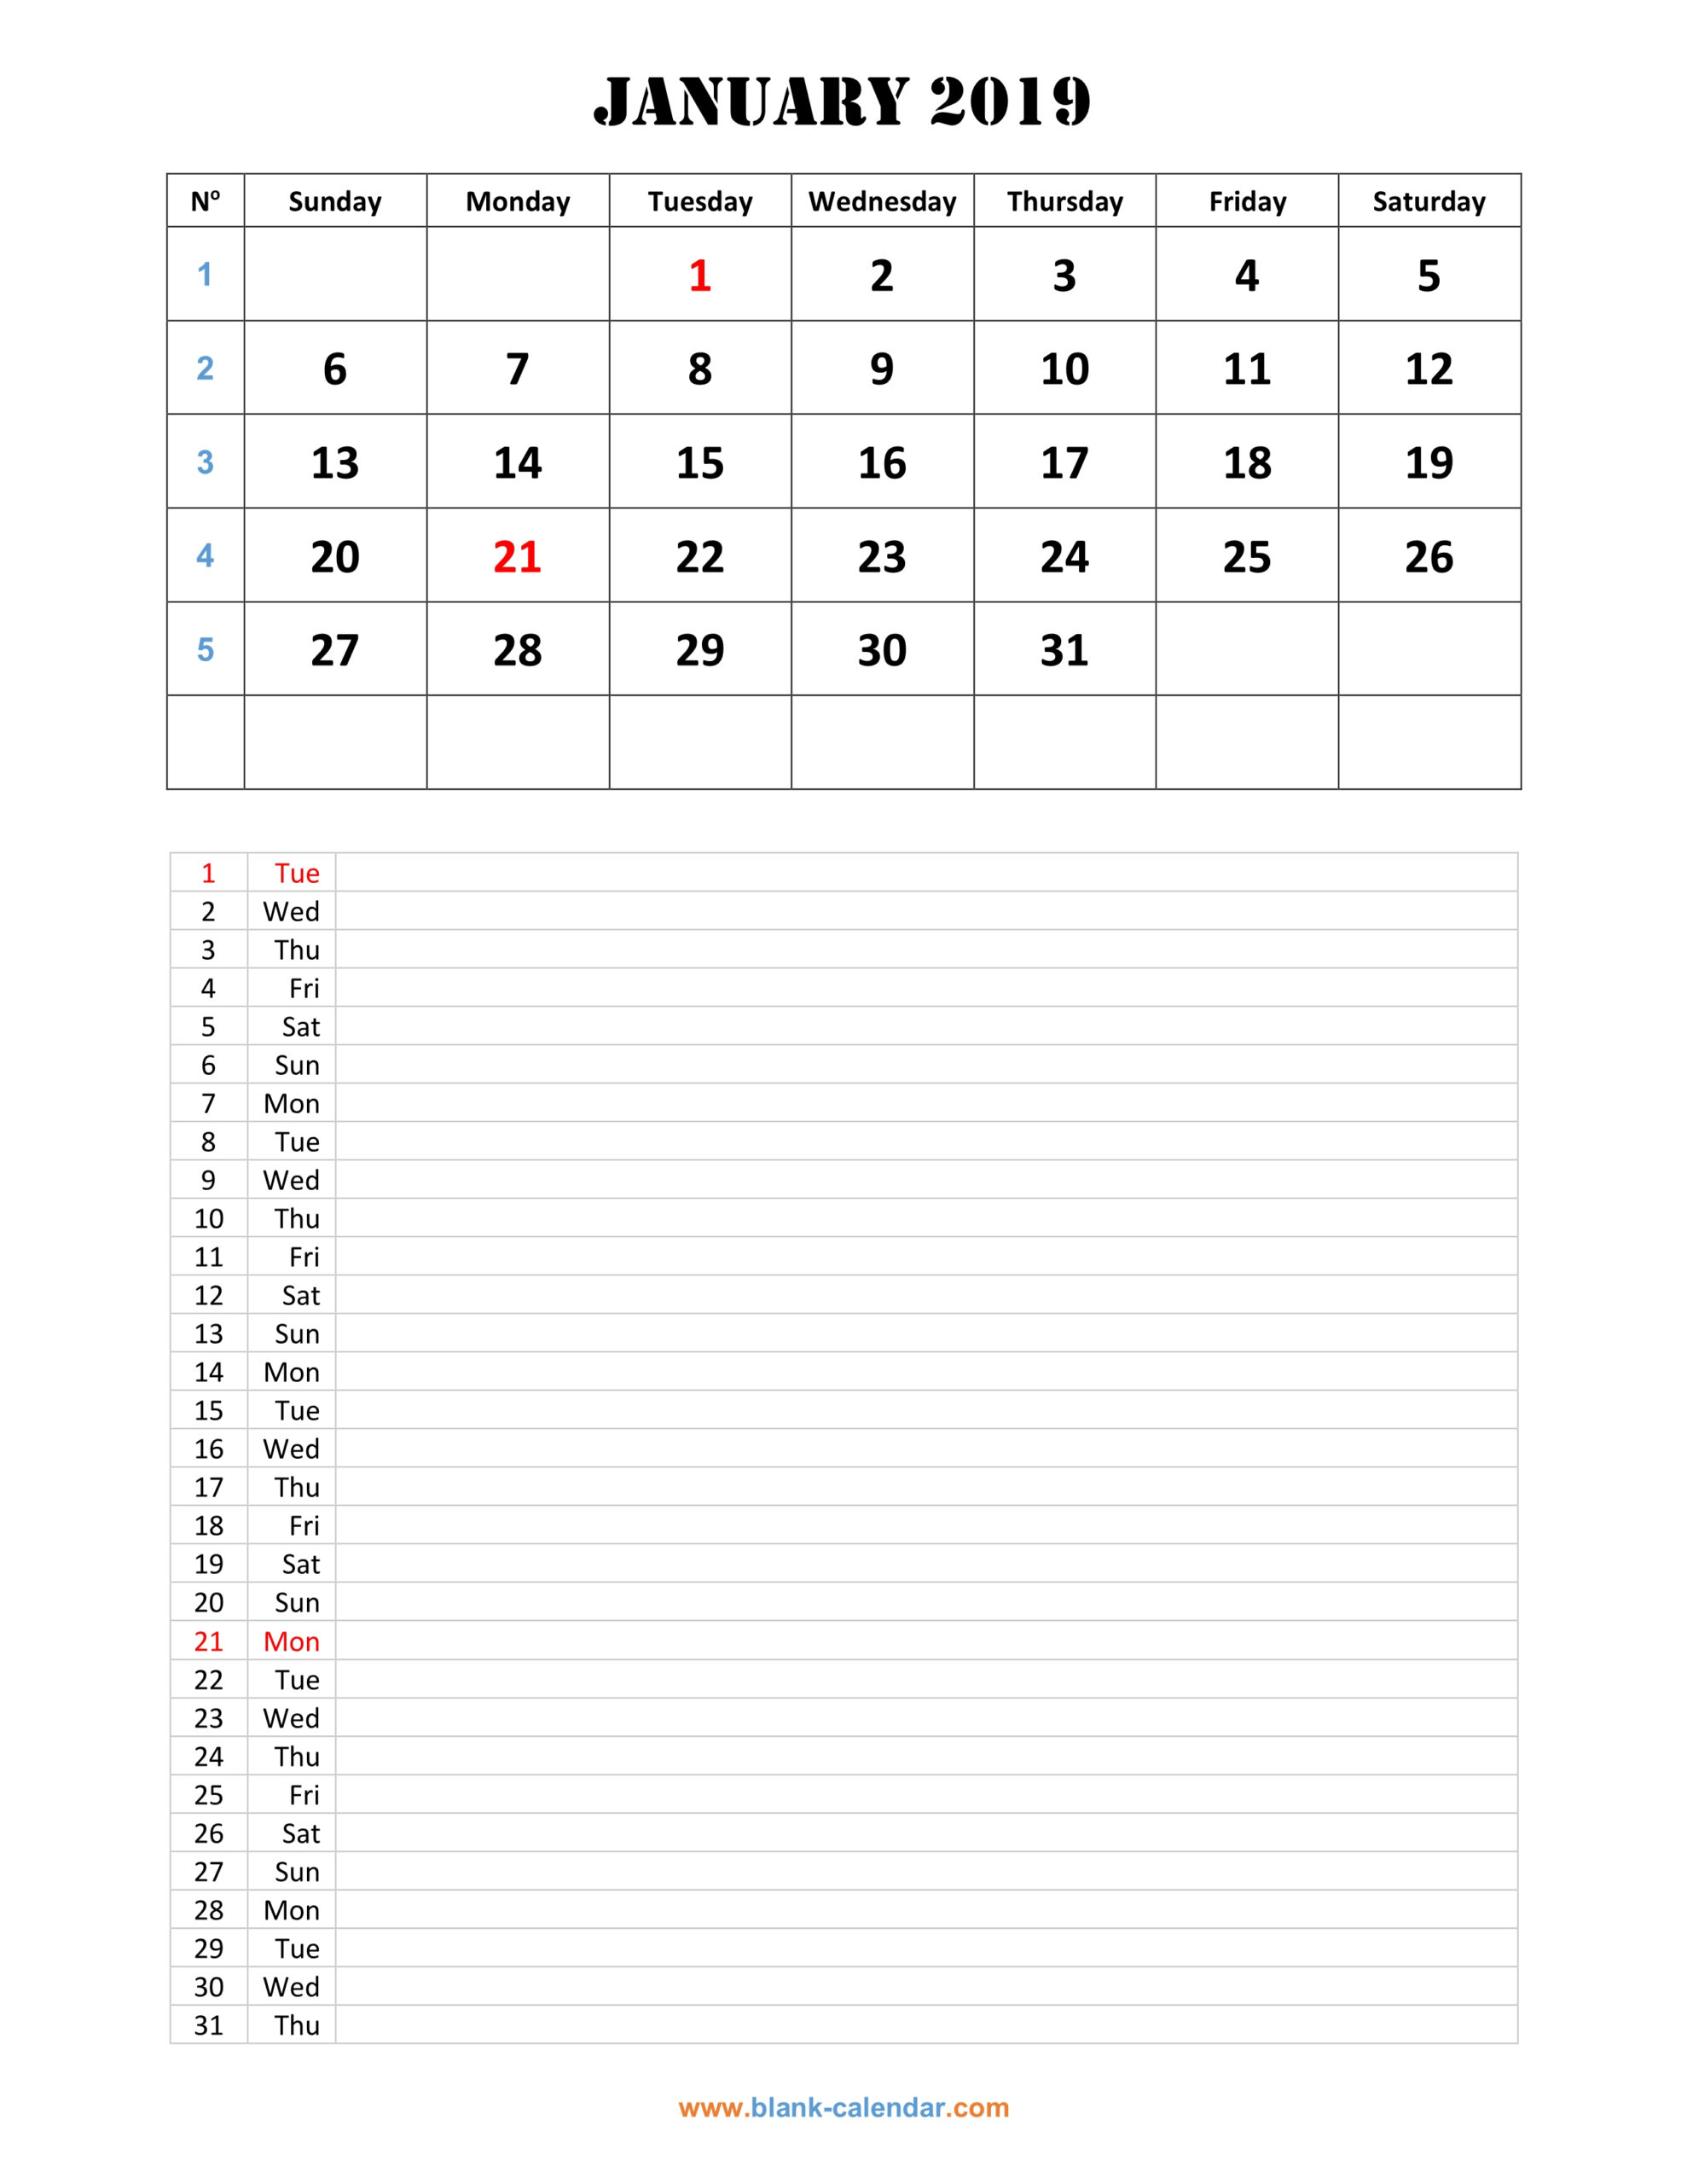 Monthly Calendar 2019 | Free Download, Editable And Printable intended for Free Printable Monthly Calendar With Lines